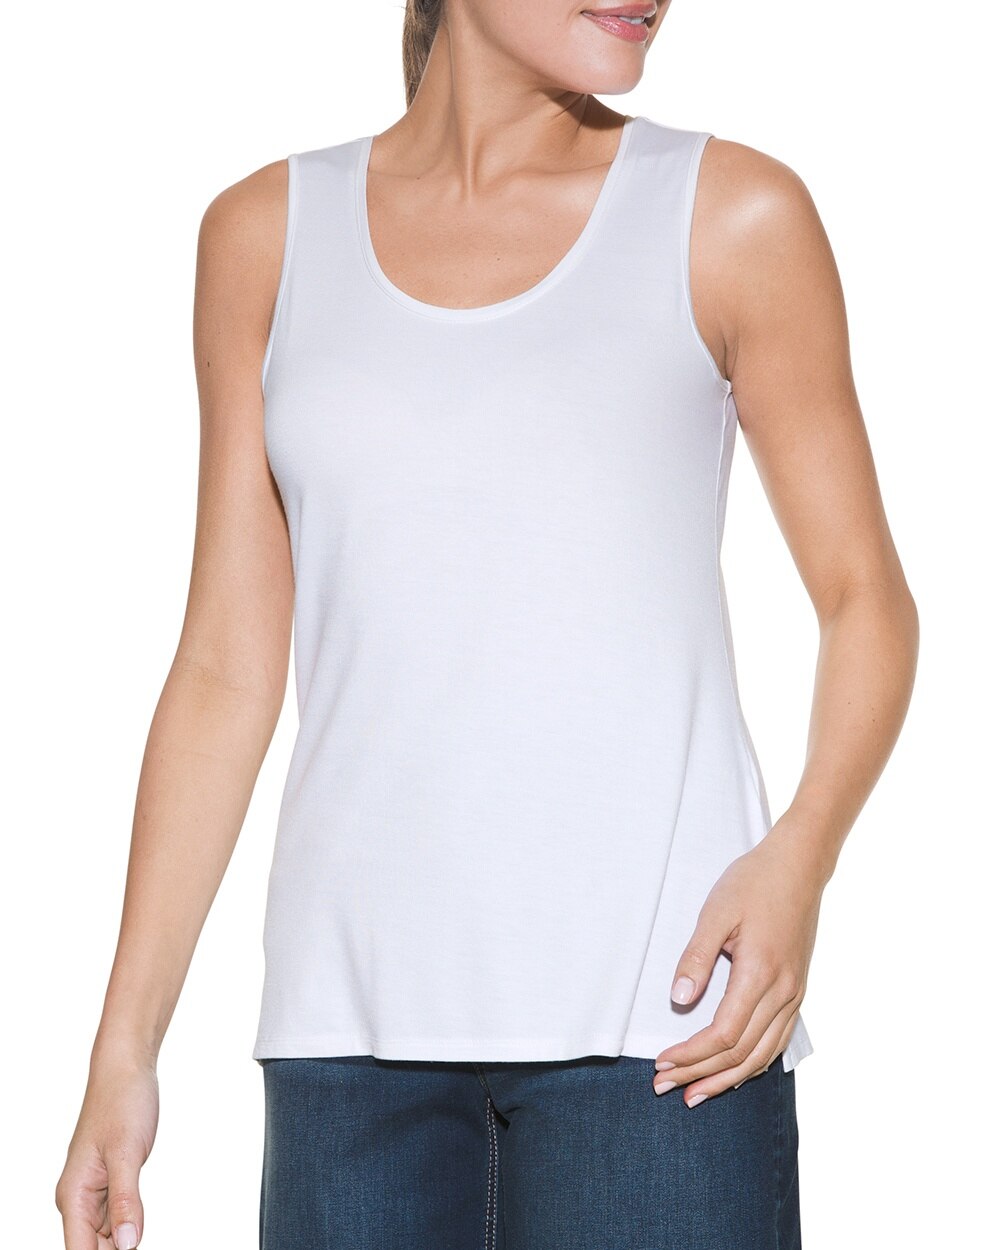 Outlet WHBM Scoop Neck Foundation Tank